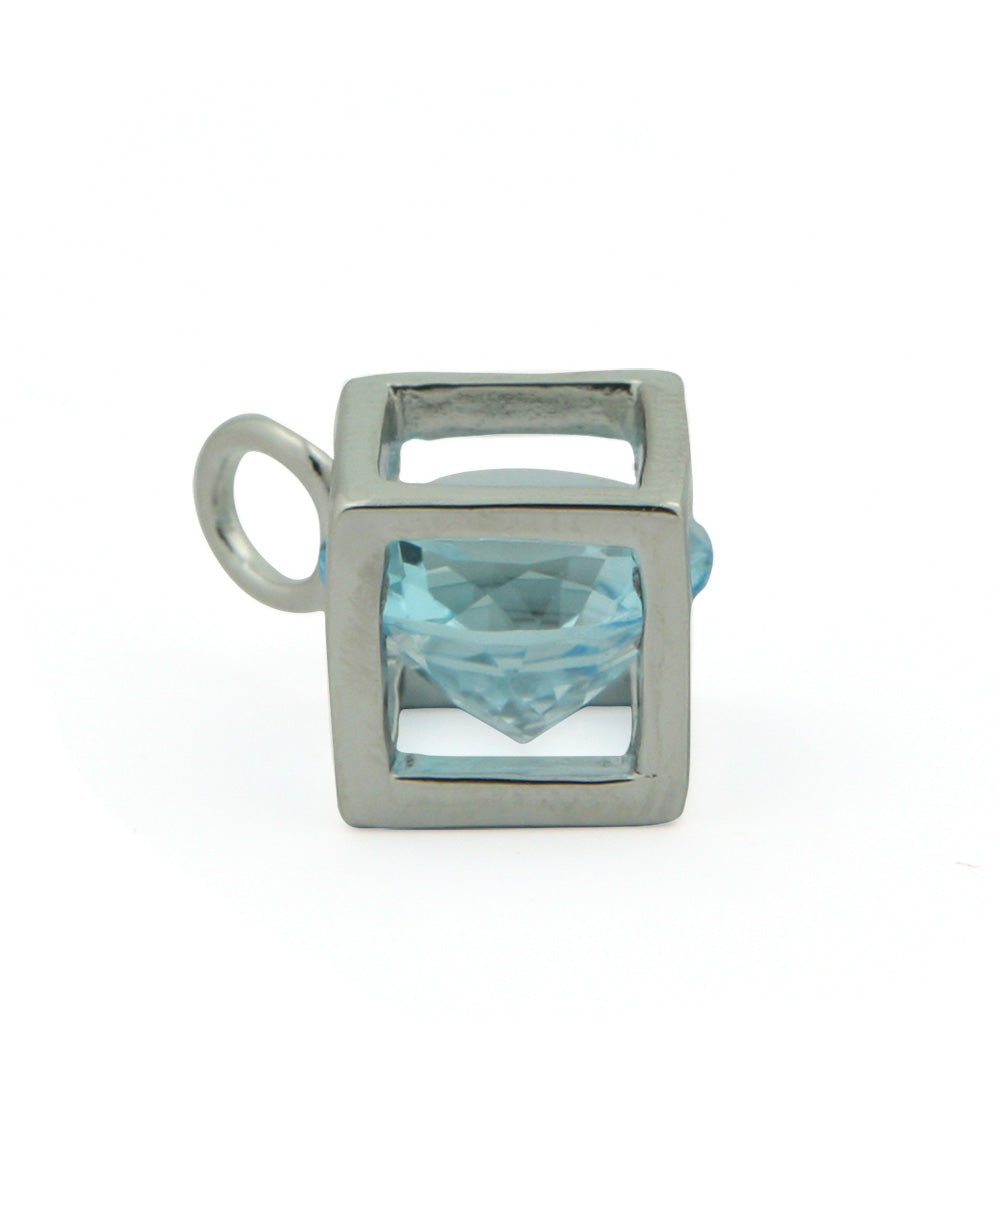 Sterling Silver Cube Pendant with Blue Topaz - Charms & Pendants - -